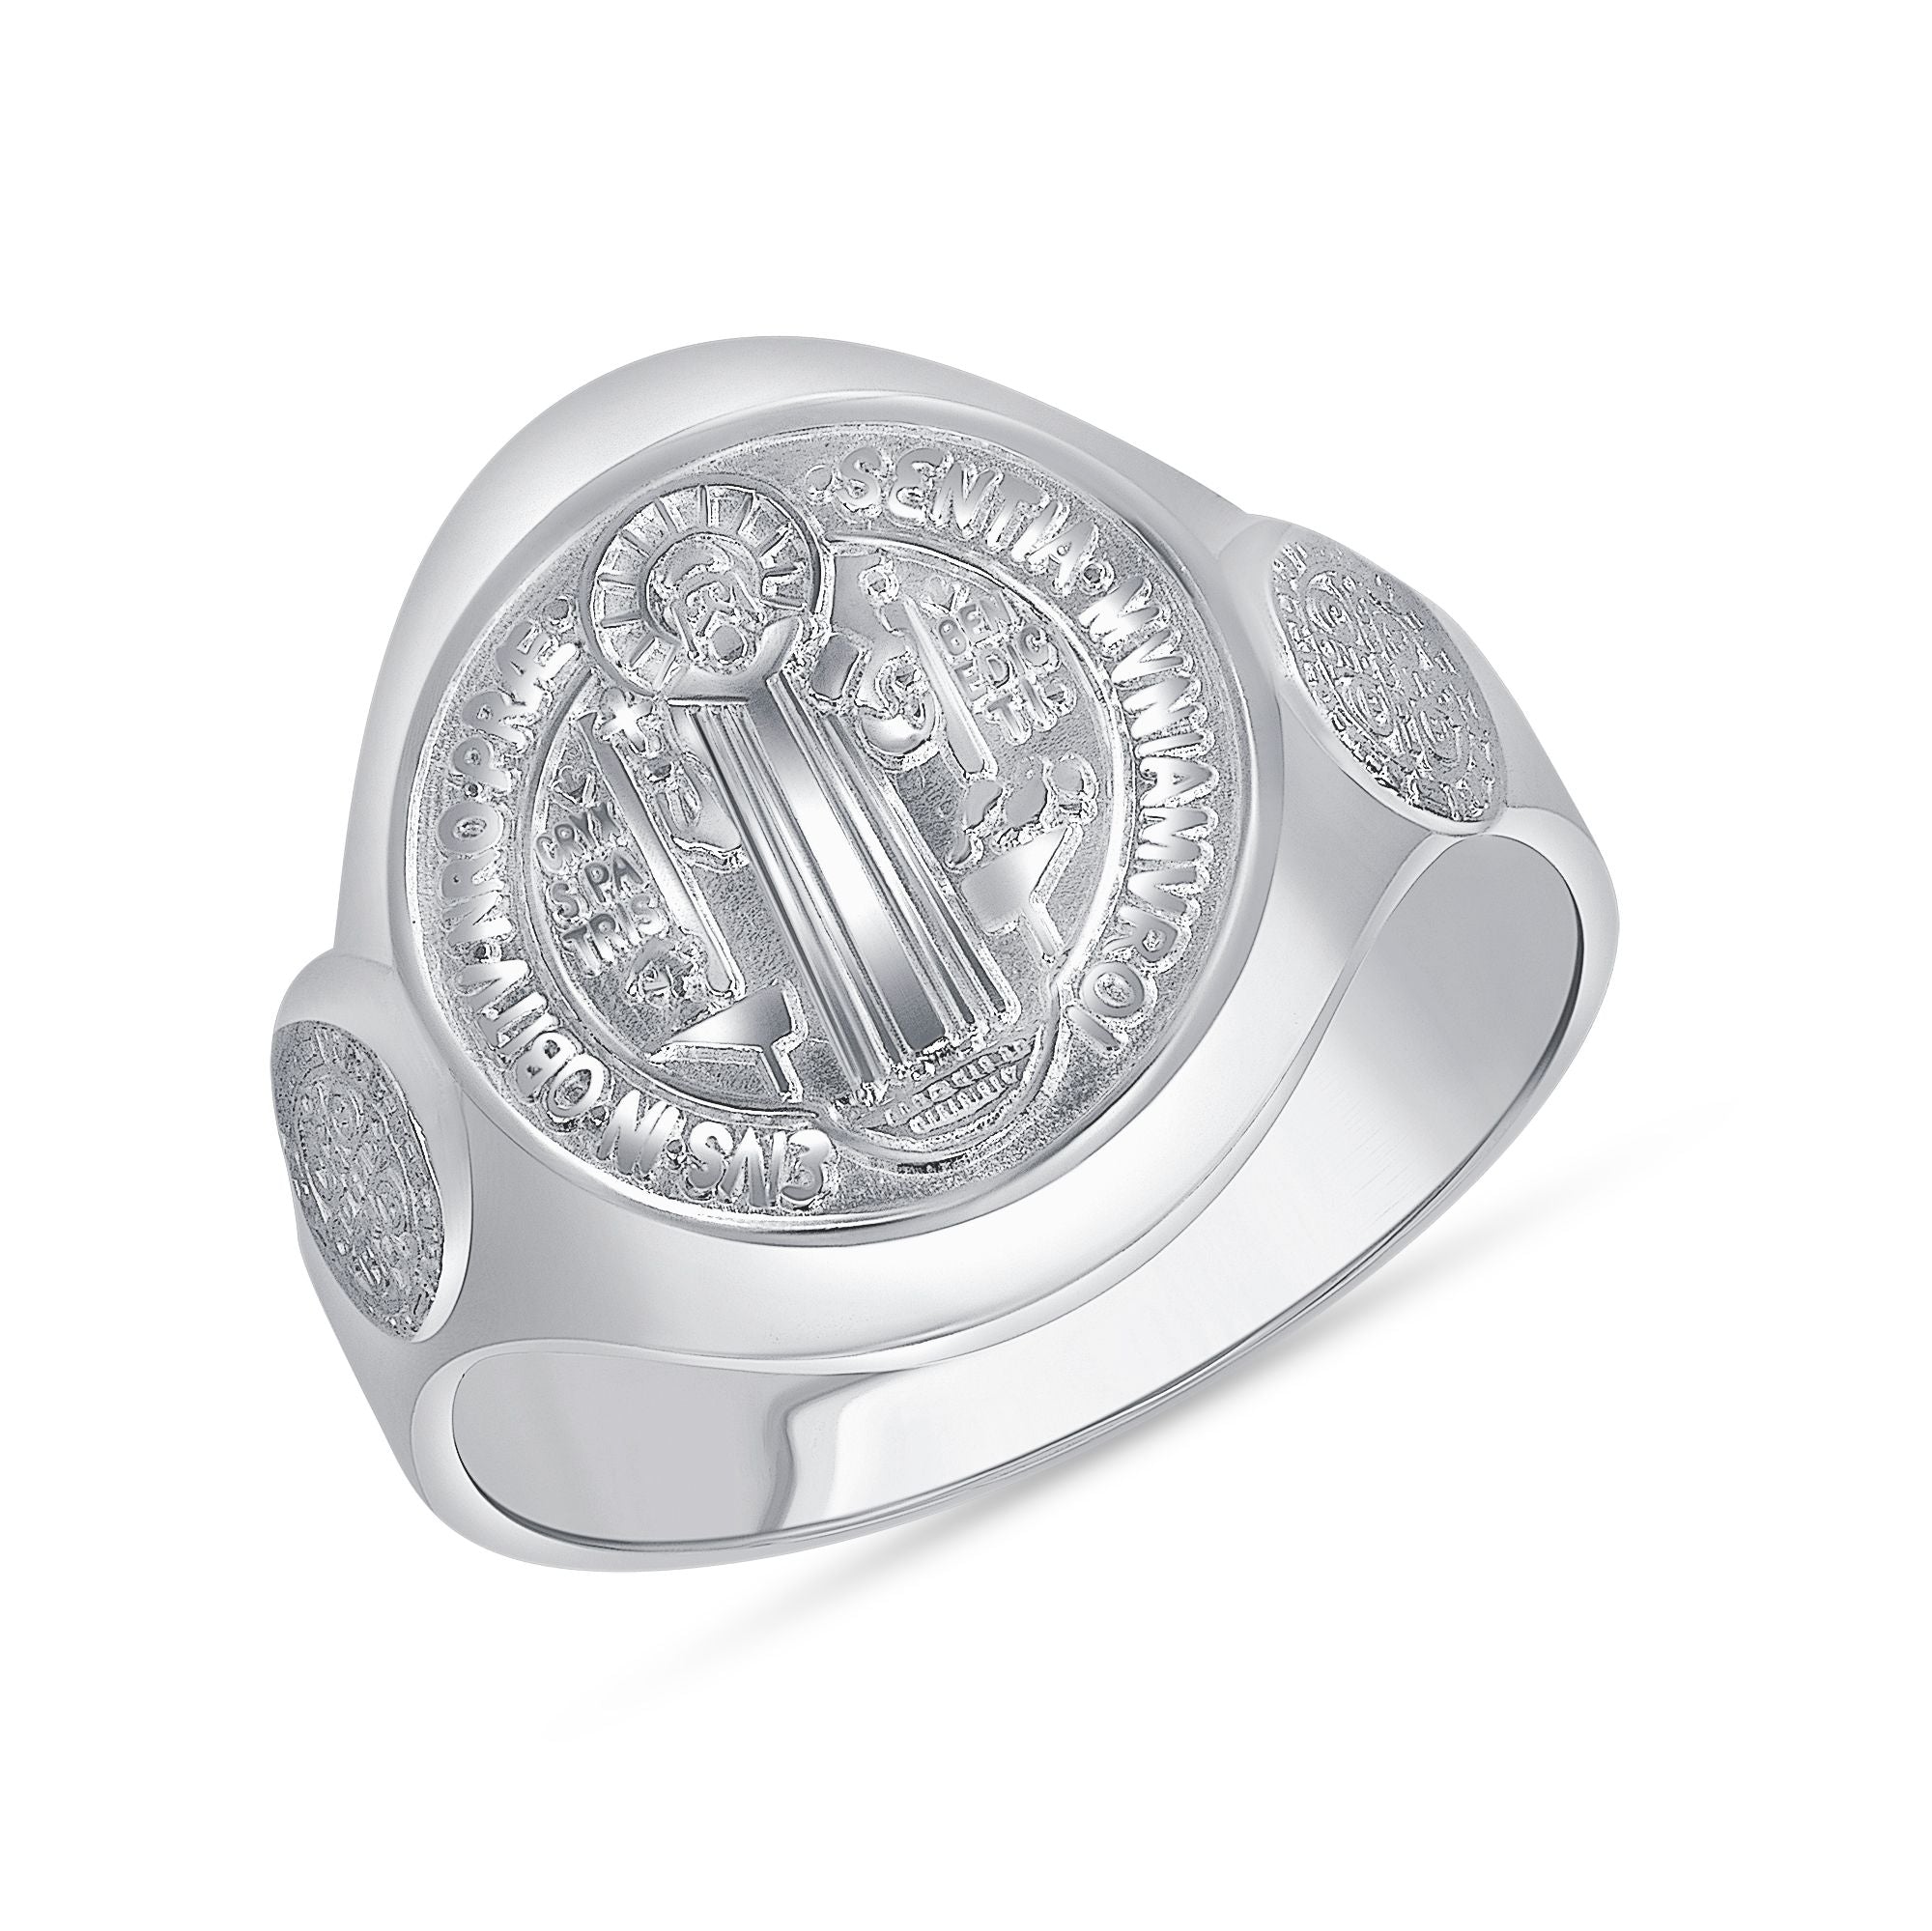 925 Sterling Silver Saint Benedict with Side Design Ring